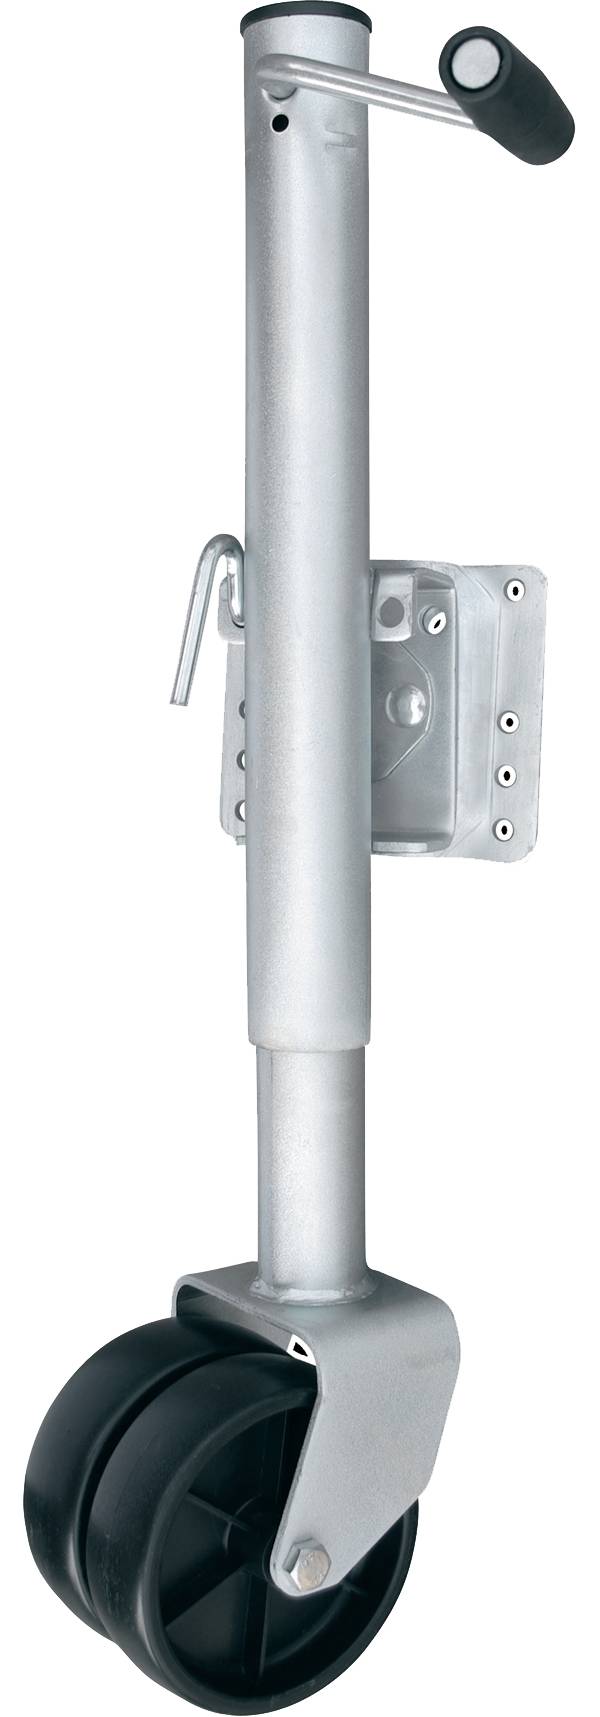 Attwood Fold Up Trailer Jack – 1500 lbs. product image